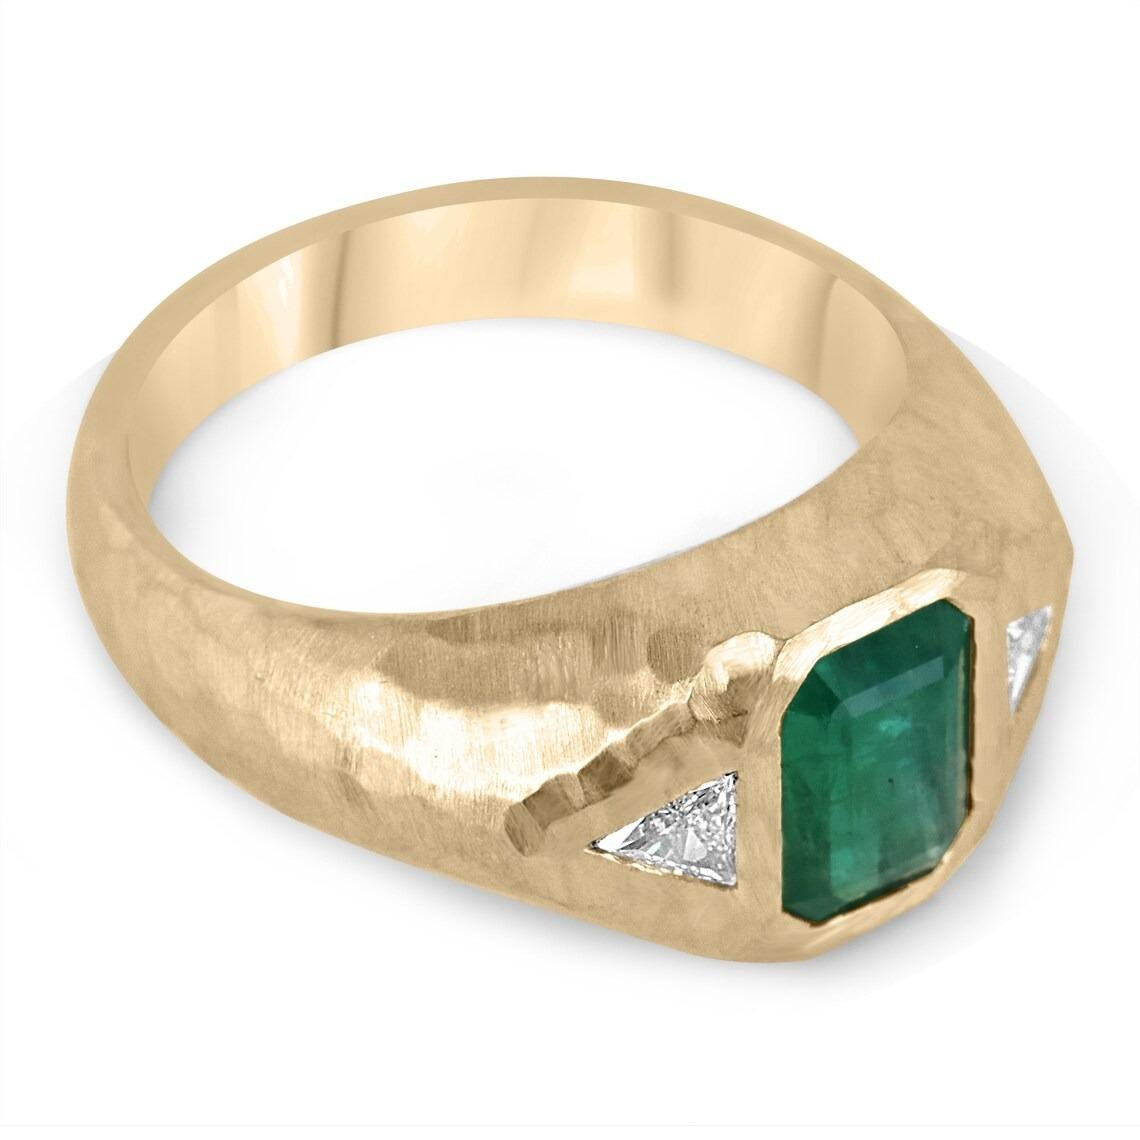 This exquisite three stone ring features a fine quality Zambian emerald as its center stone, bezel set vertically for a modern and sophisticated look. Two trillion cut diamonds are set on either side of the emerald, adding a touch of sparkle and